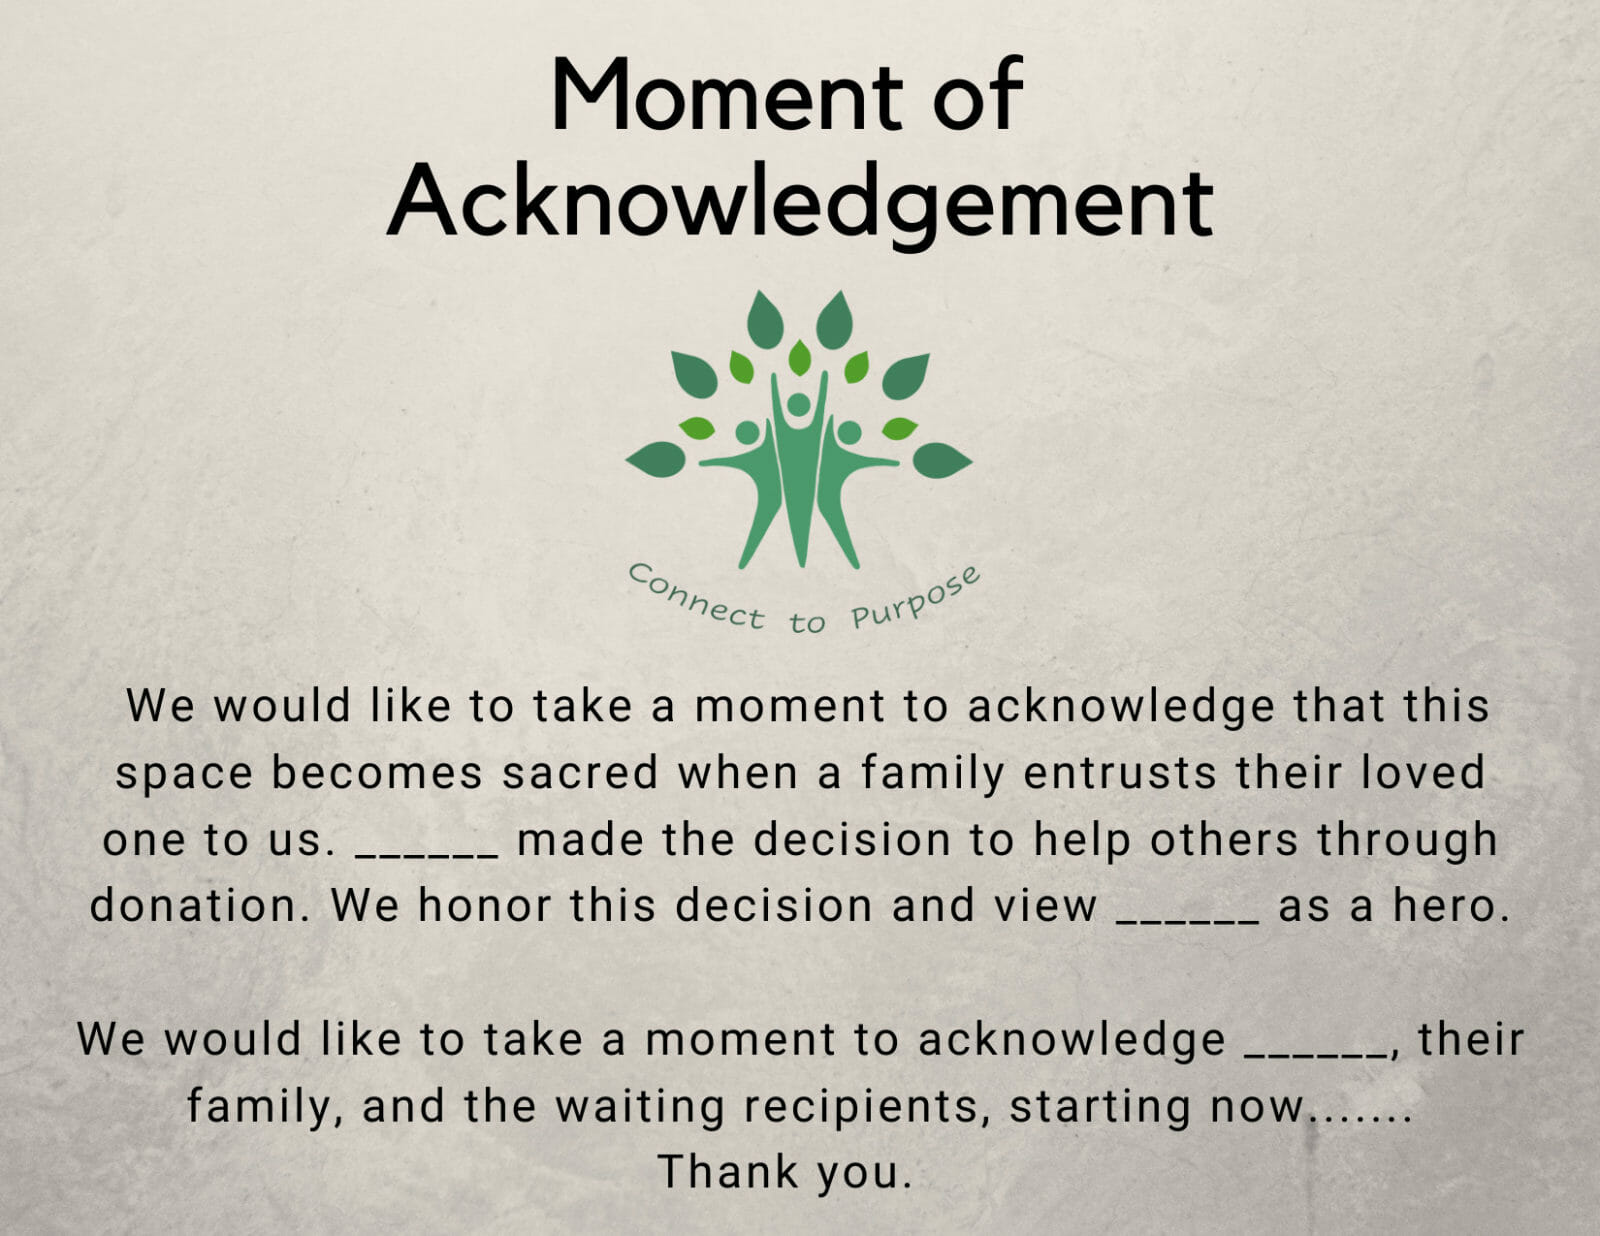 Language on the moment of acknowledgement card